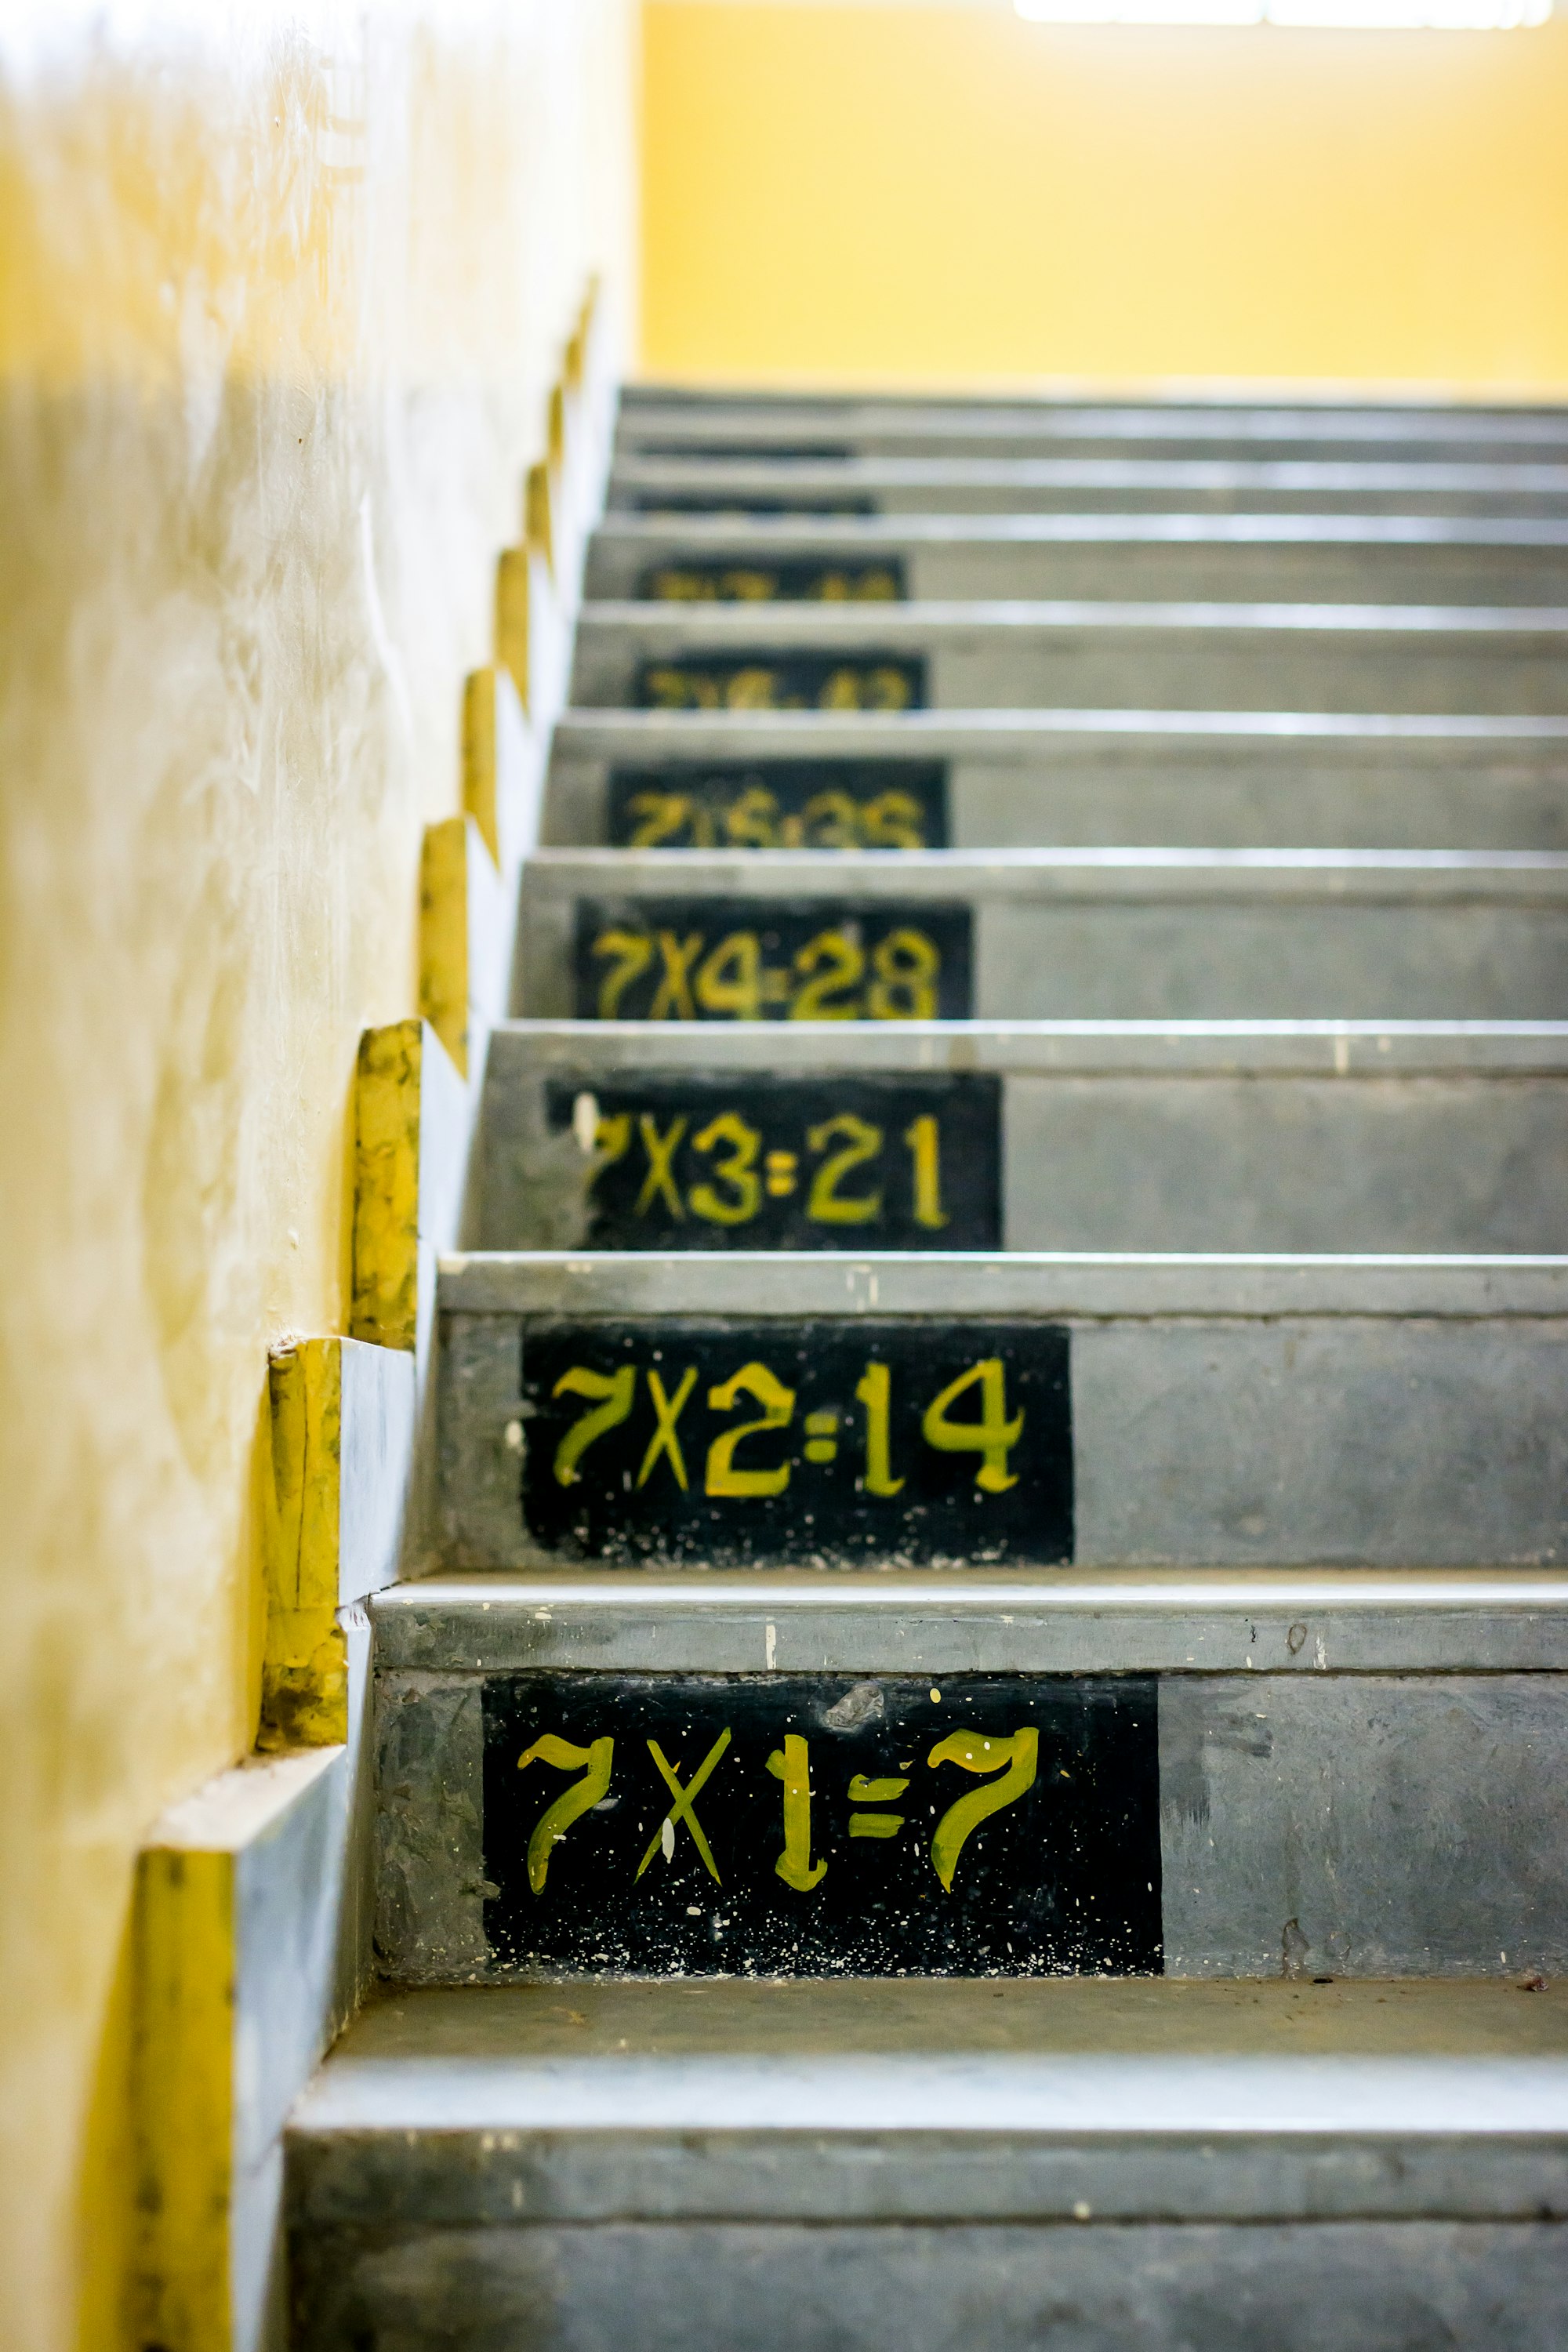 A well-worn staircase, where each stair is labeled with the times tables for 7, e.g. 7x1=7, 7x2=14, etc.